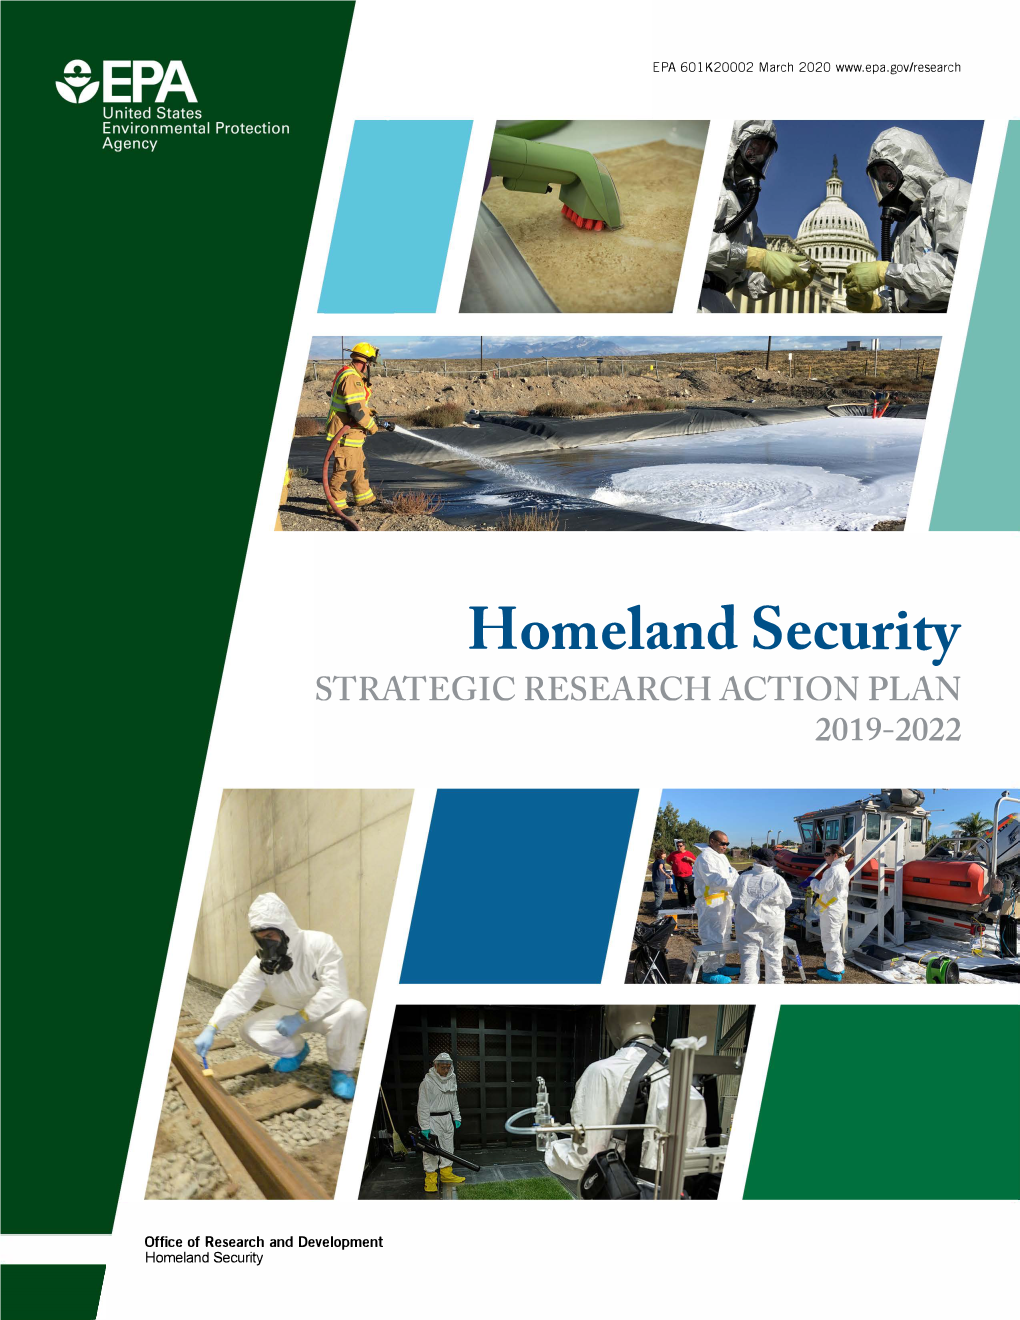 Homeland Security STRATEGICRESEARCH ACTION PLAN 2019-2022